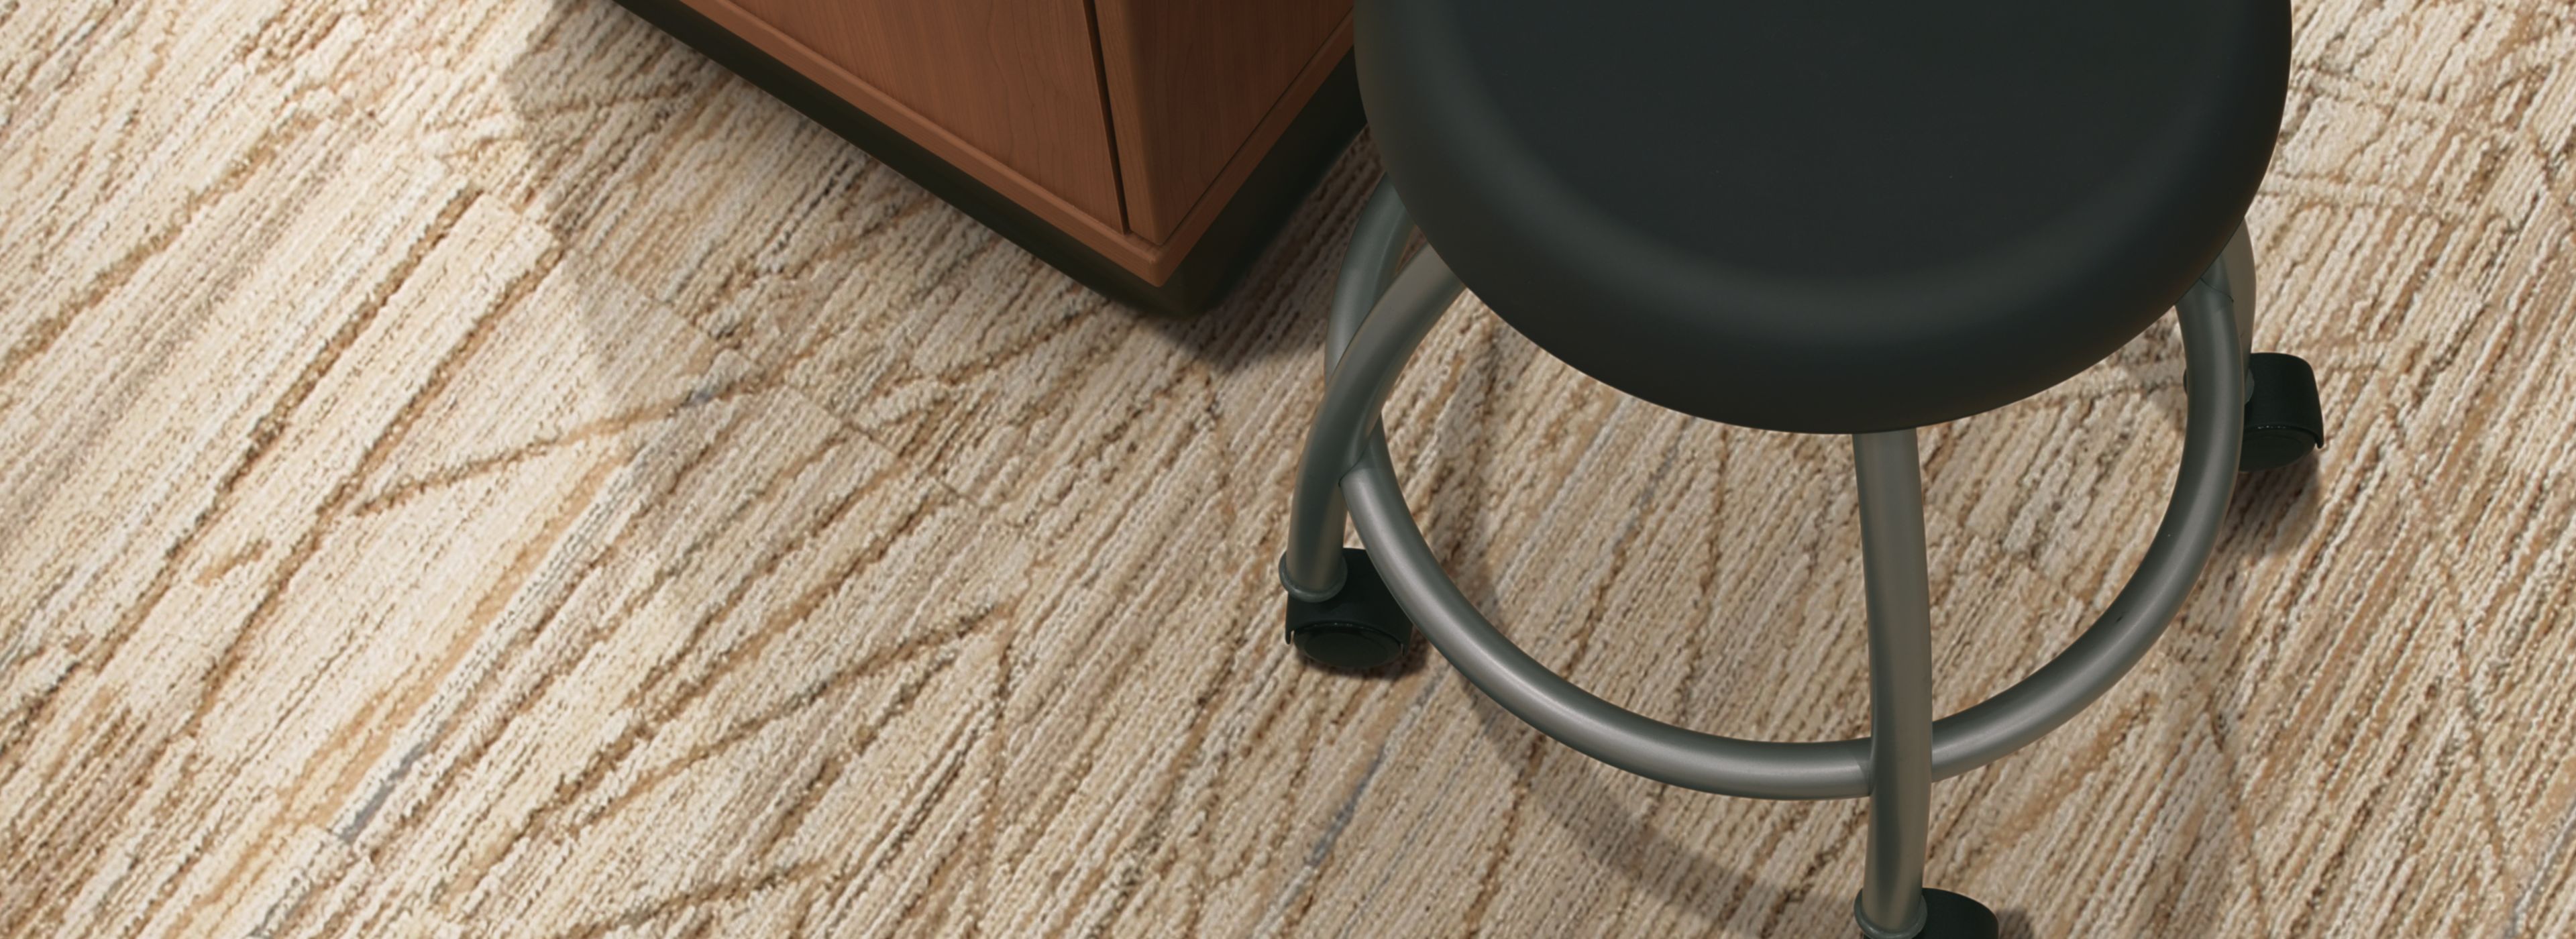 Interface Prairie Grass carpet tile in close up view with stool and cabinet image number 1